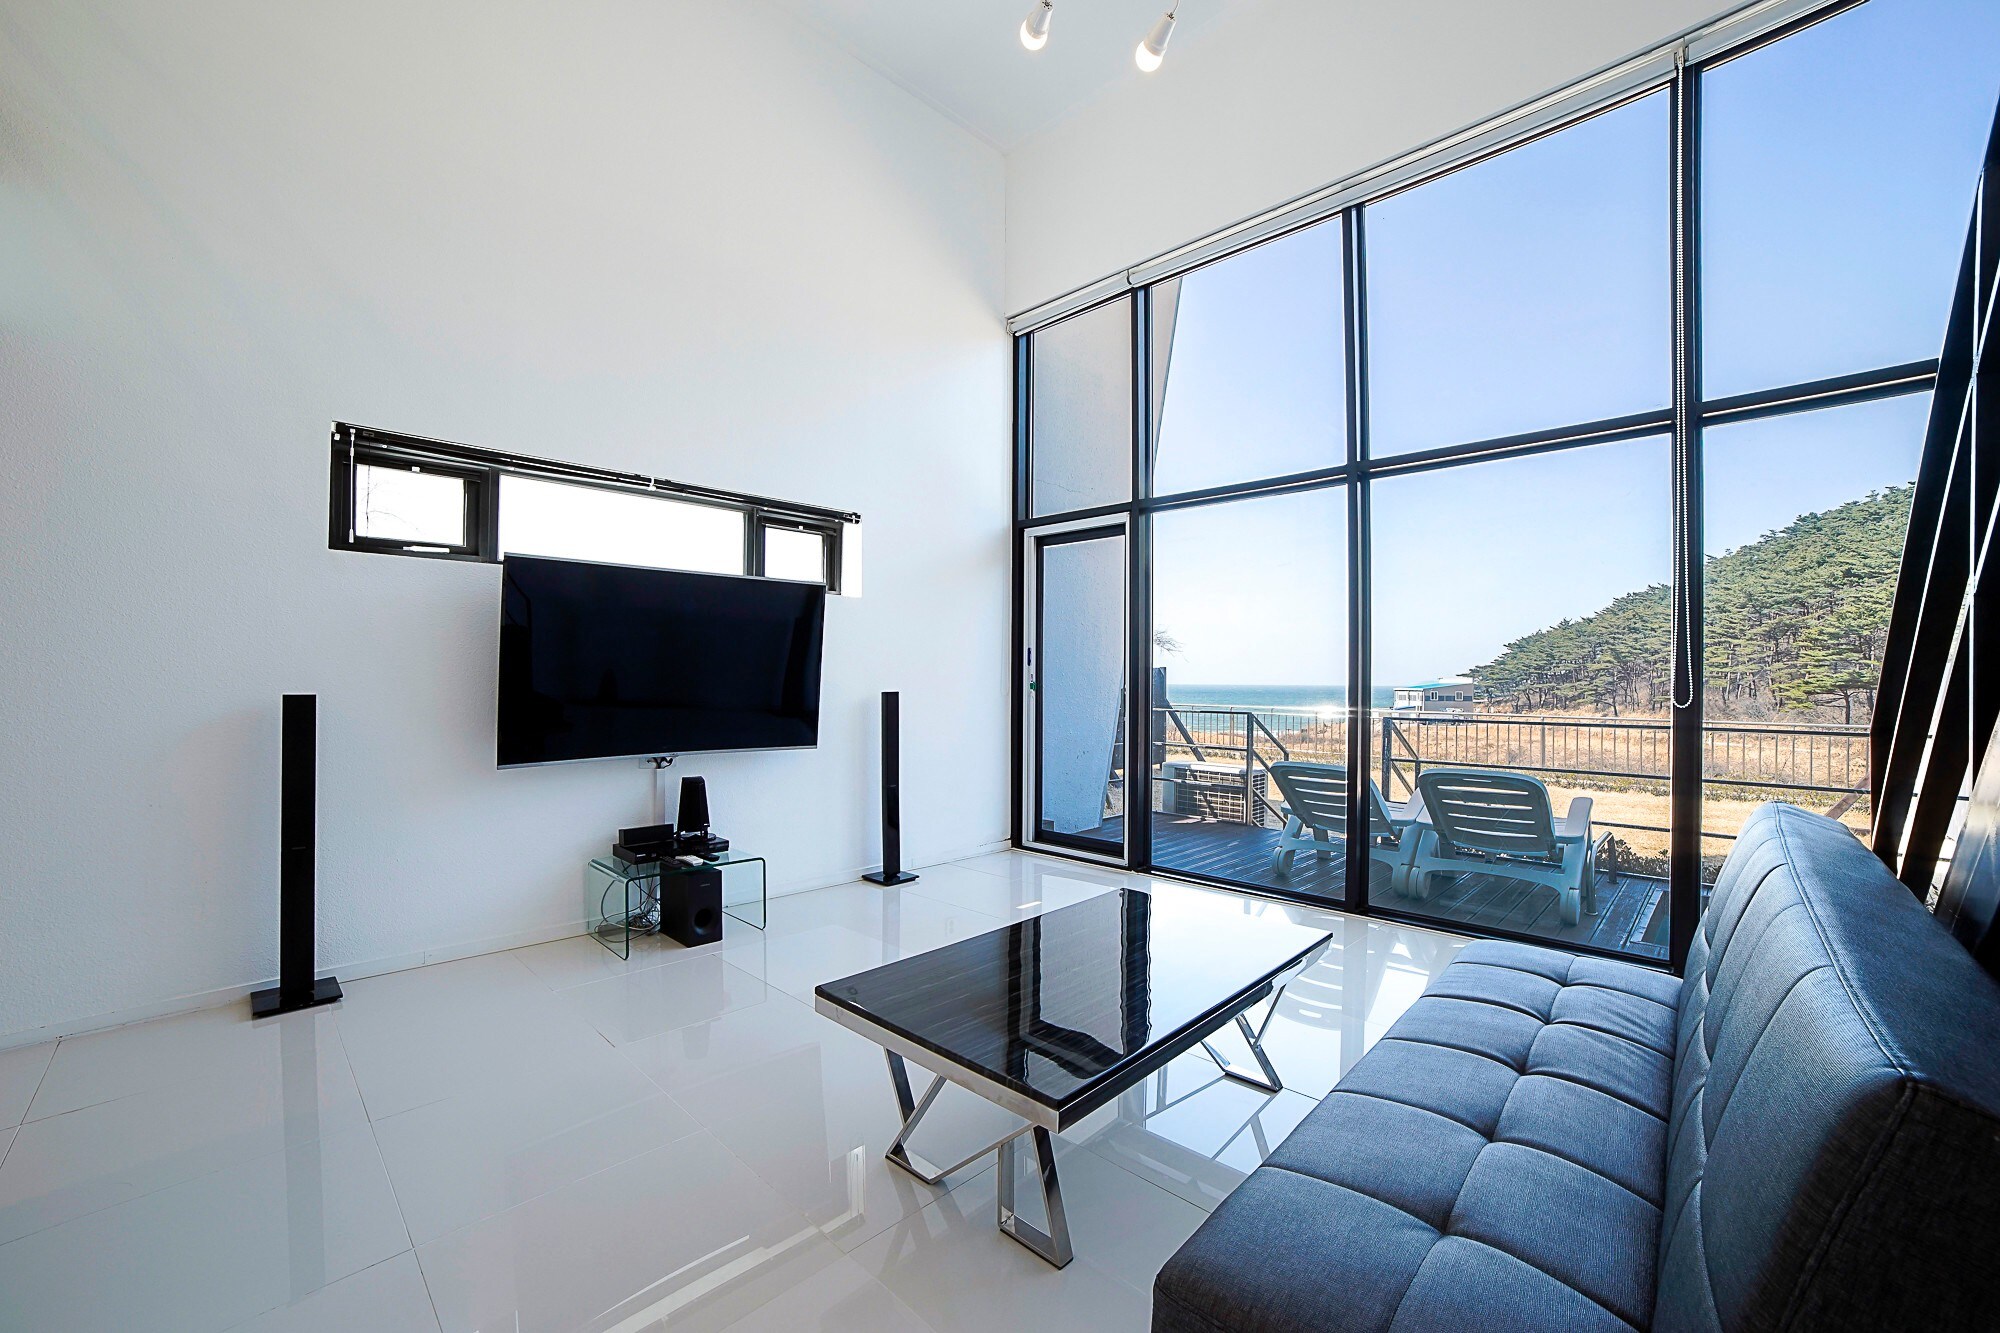 Property Image 1 -  Modern style home overlooking the sea (D)